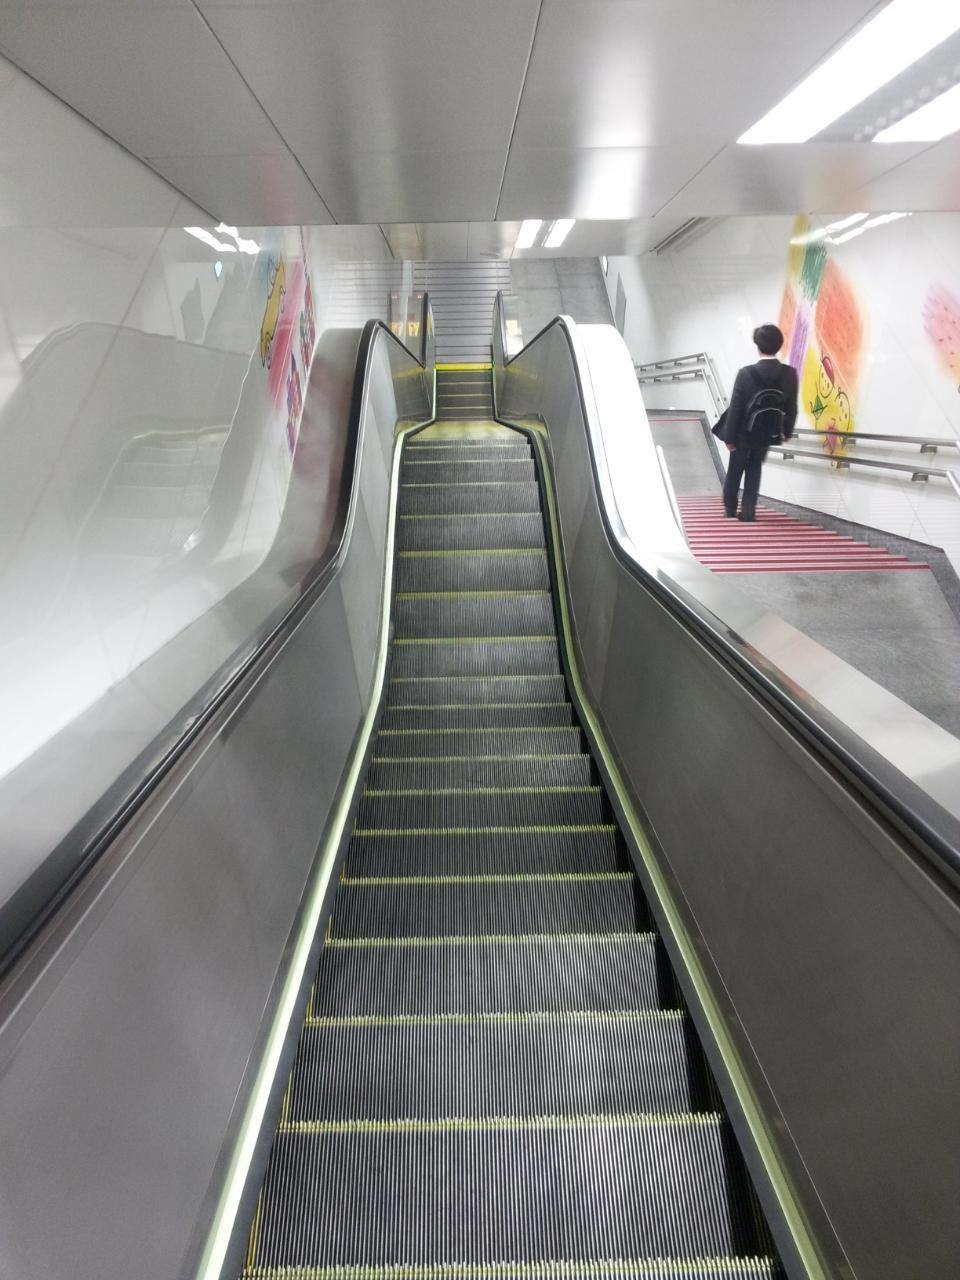 Escalator with yellow safety striping on steps; instead of a constant decline to the bottom, the escalator has a section in the middle that runs straight across